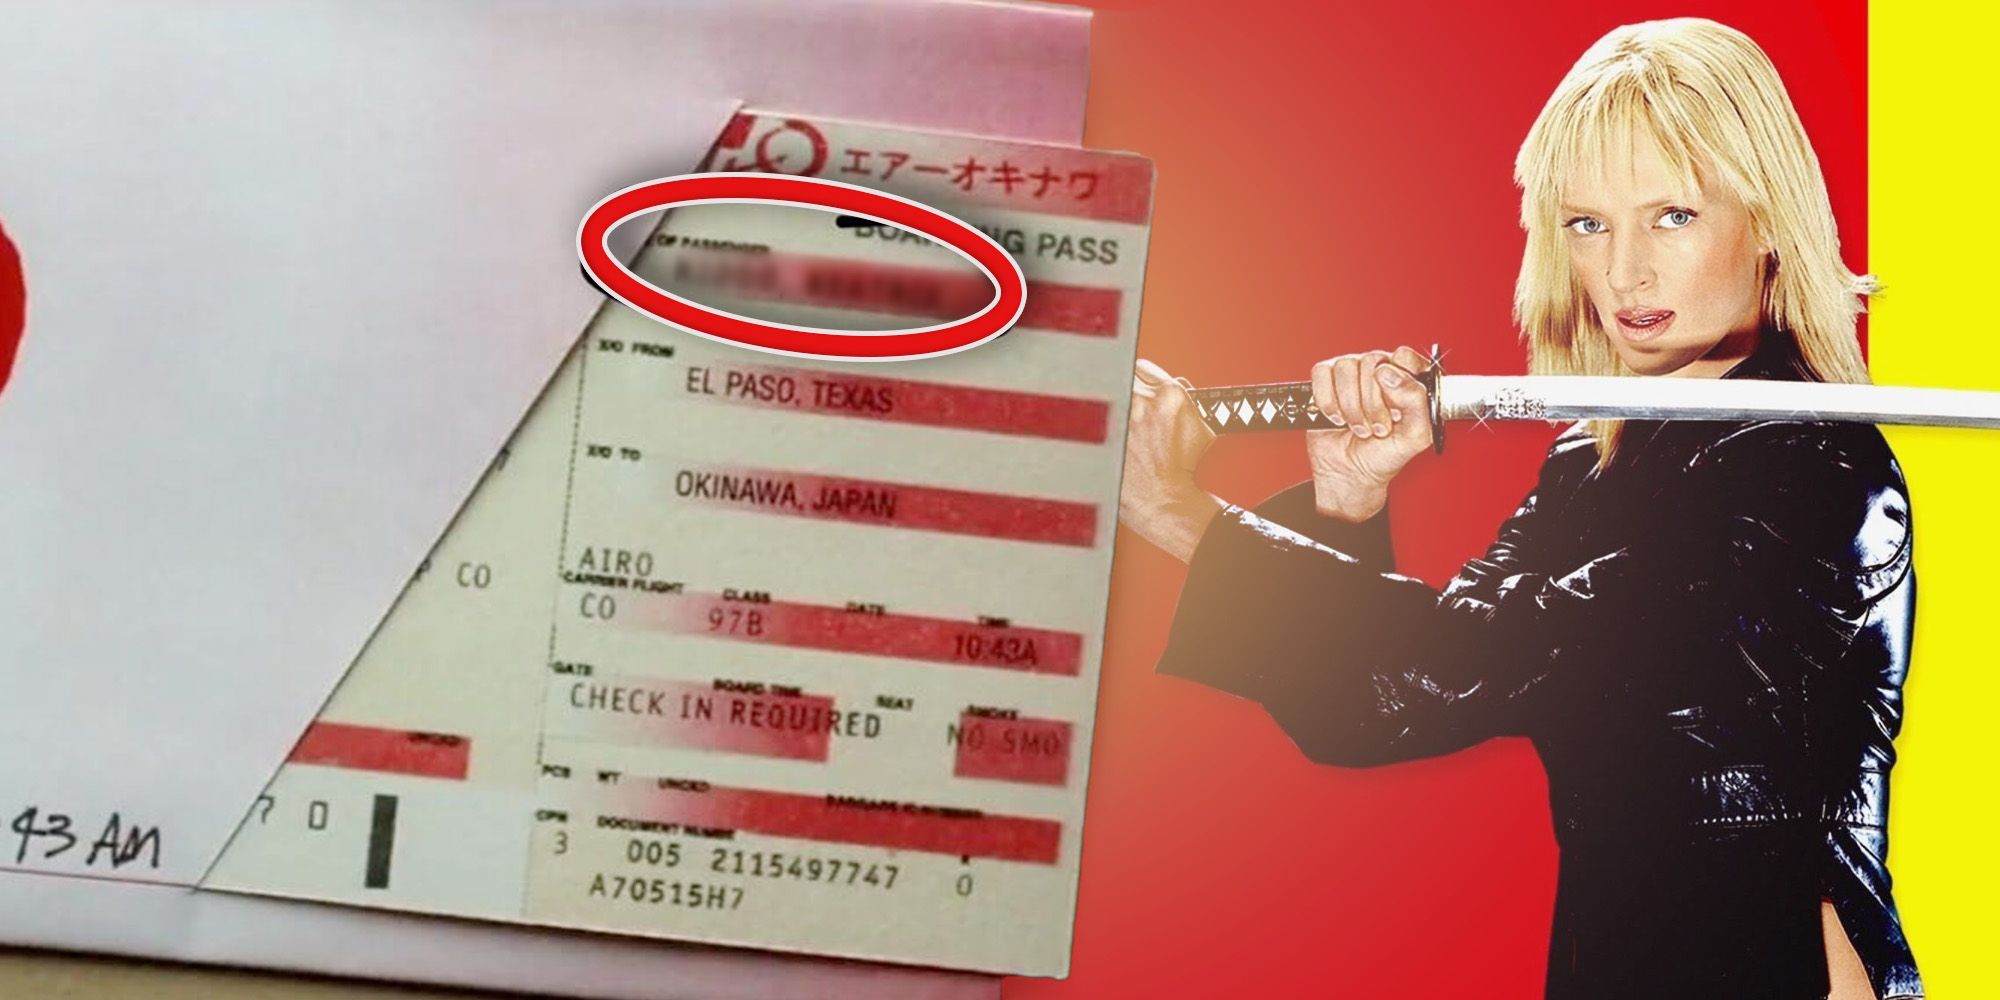 Kill Bill: Bride's name is secretly revealed on the plane ticket